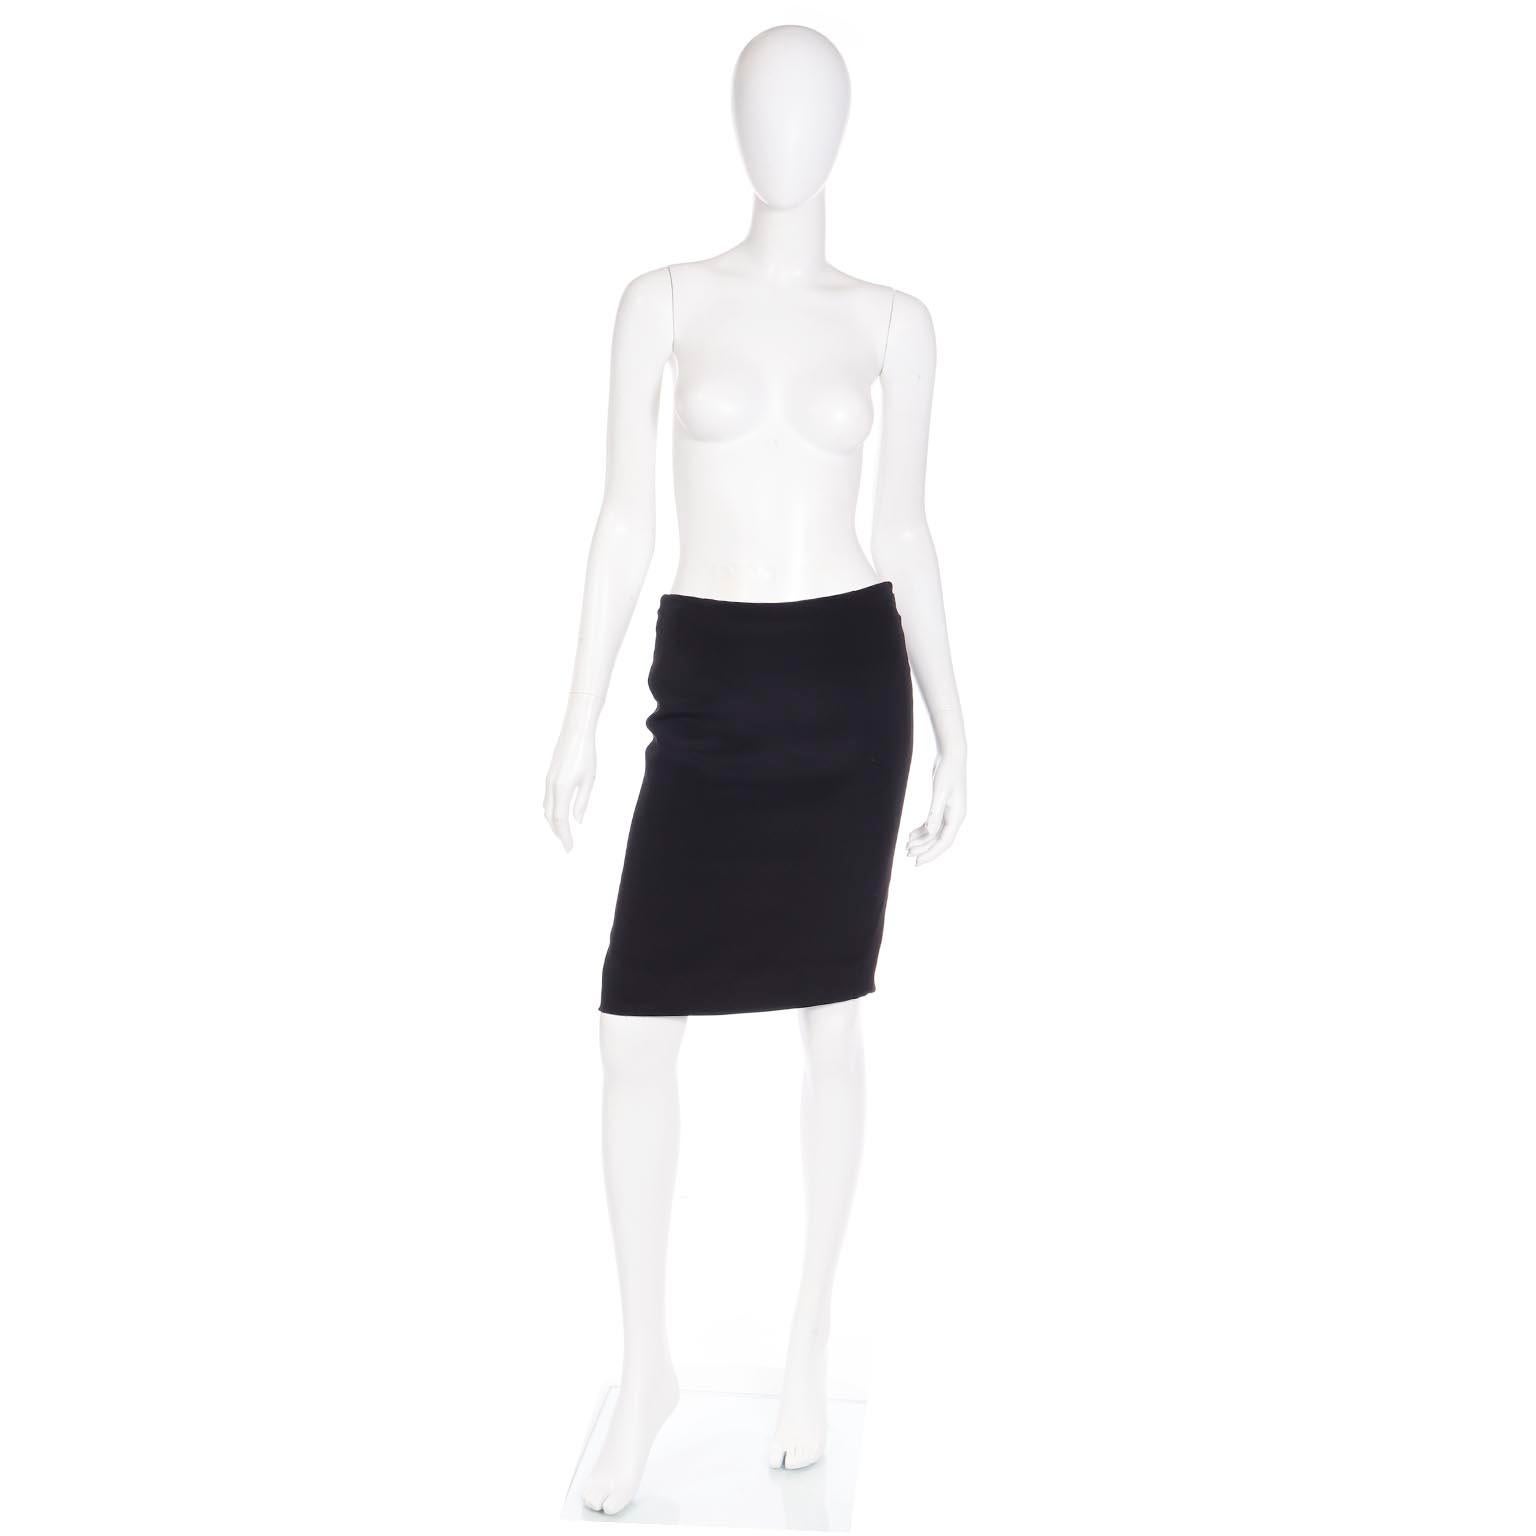 This is a very special early 2000's Valentino black pencil skirt with beautiful gathered ruching in the back that frames a center panel. Valentino Garavani vintage pieces are beautifully made and they always have details that set them apart. This